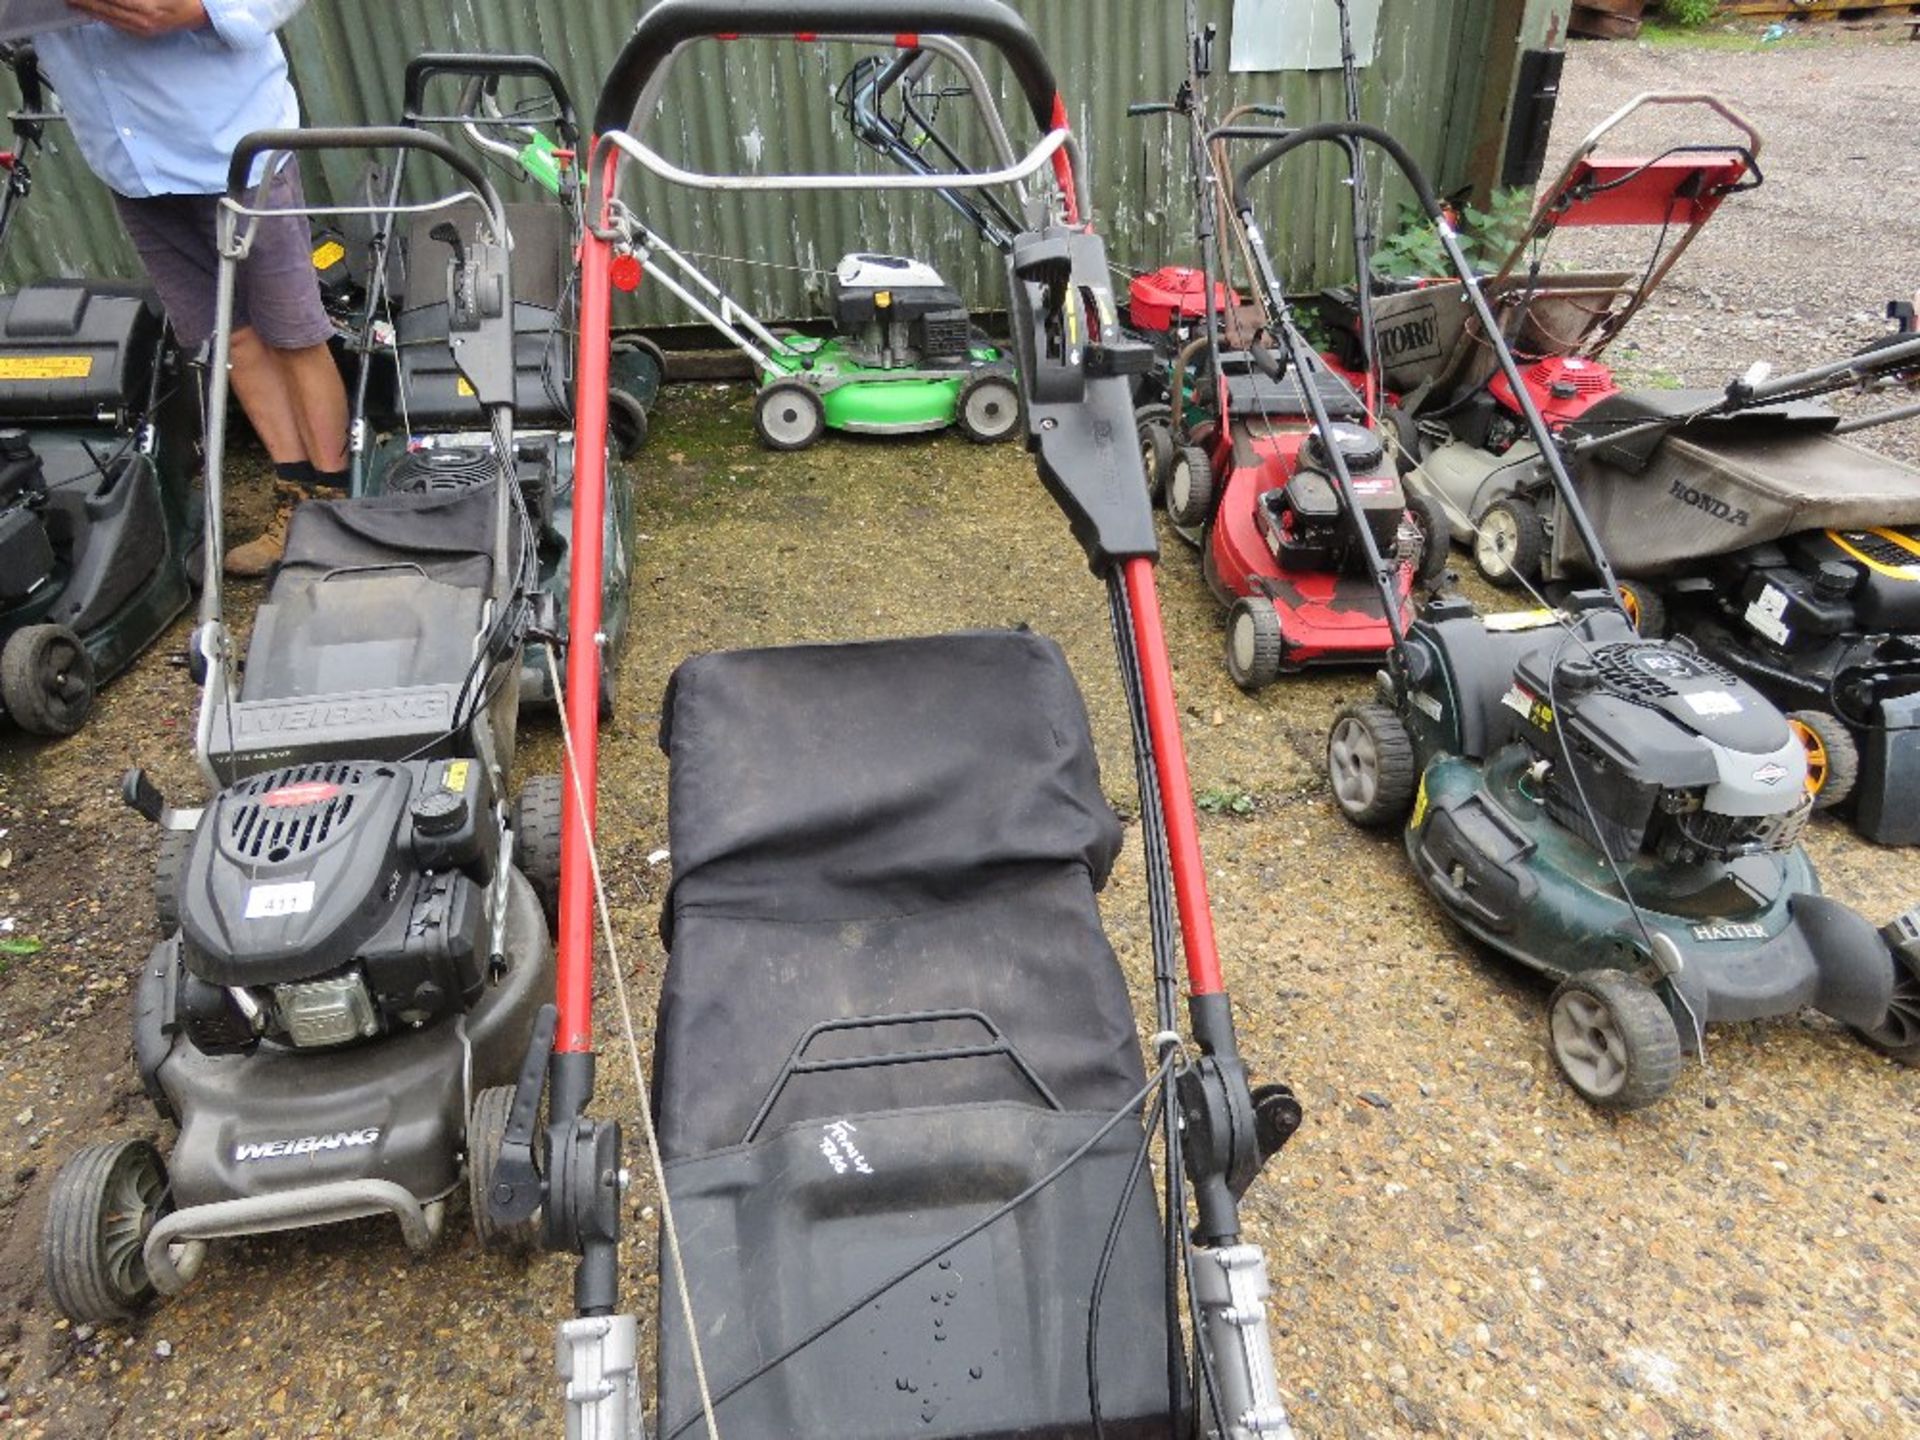 WEIBANG LEGACY 48V ROLLER MOWER WITH COLLECTOR. DIRECT FROM LOCAL LANDSCAPE COMPANY WHO ARE CLOSING - Image 3 of 3